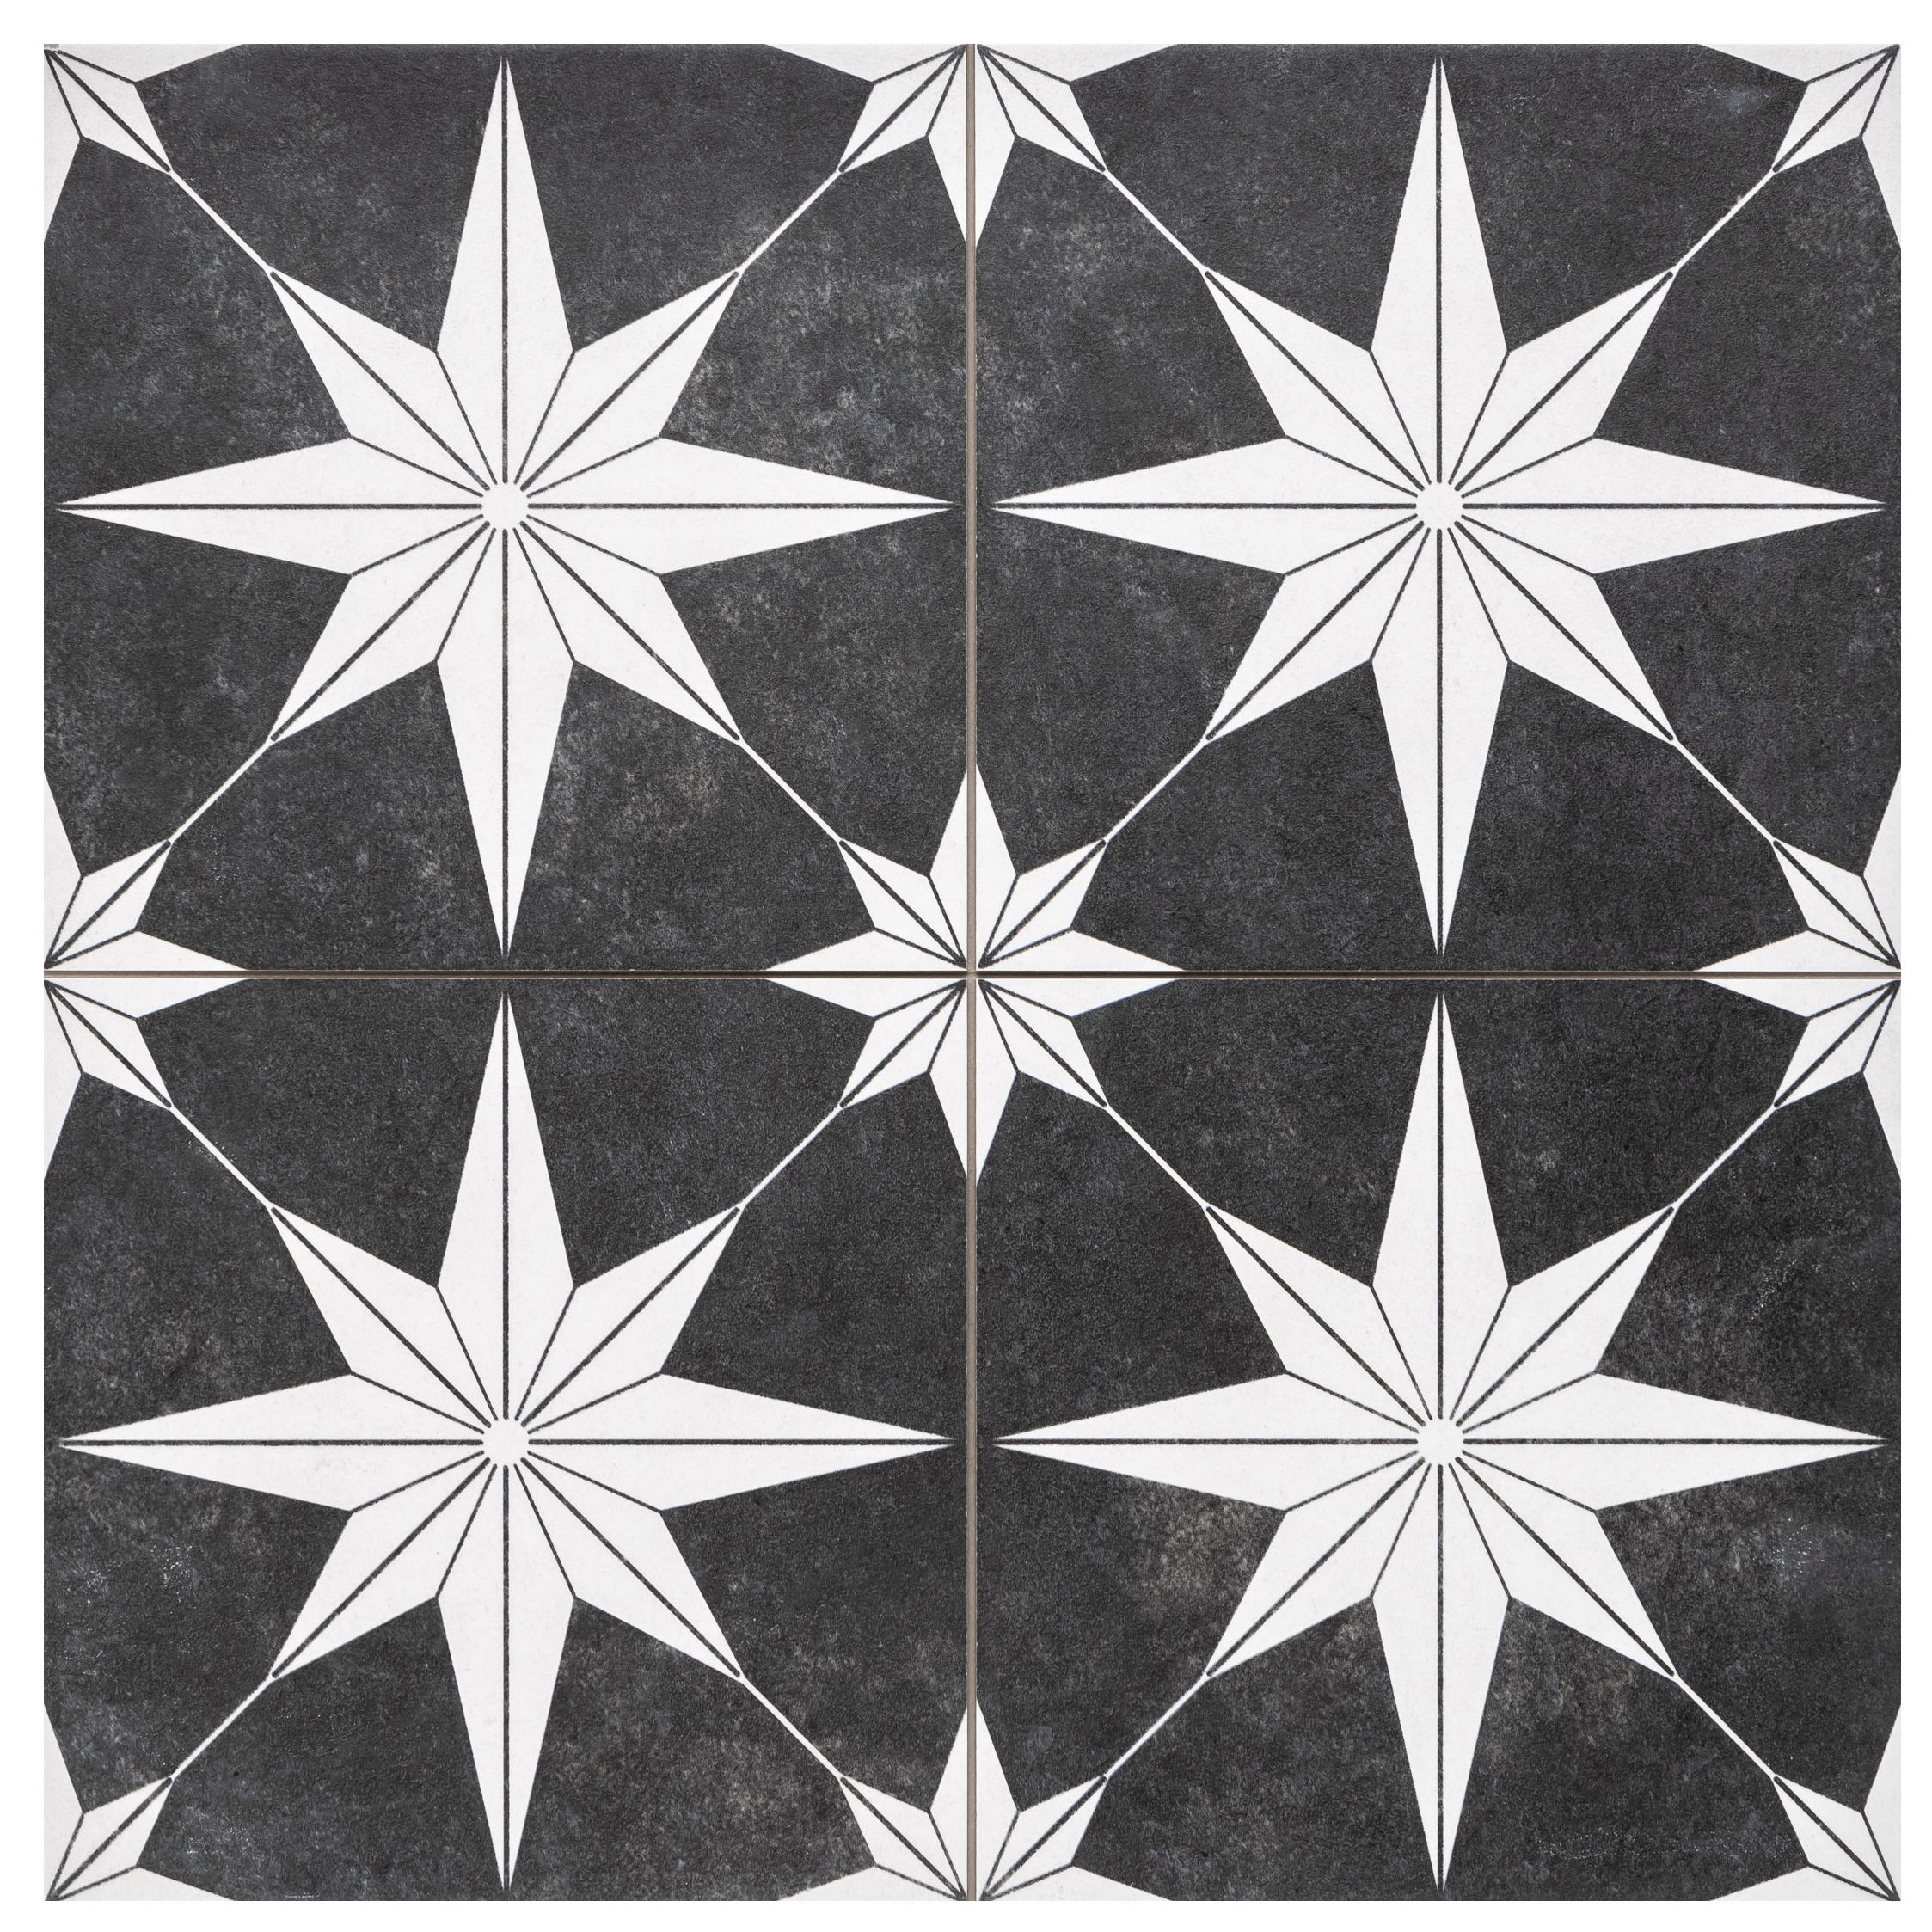 House of Mosaics Etoile Black & white Matt Patterned Distressed effect Porcelain Indoor & outdoor Wall & floor Tile, Pack of 7, (L)450mm (W)450mm